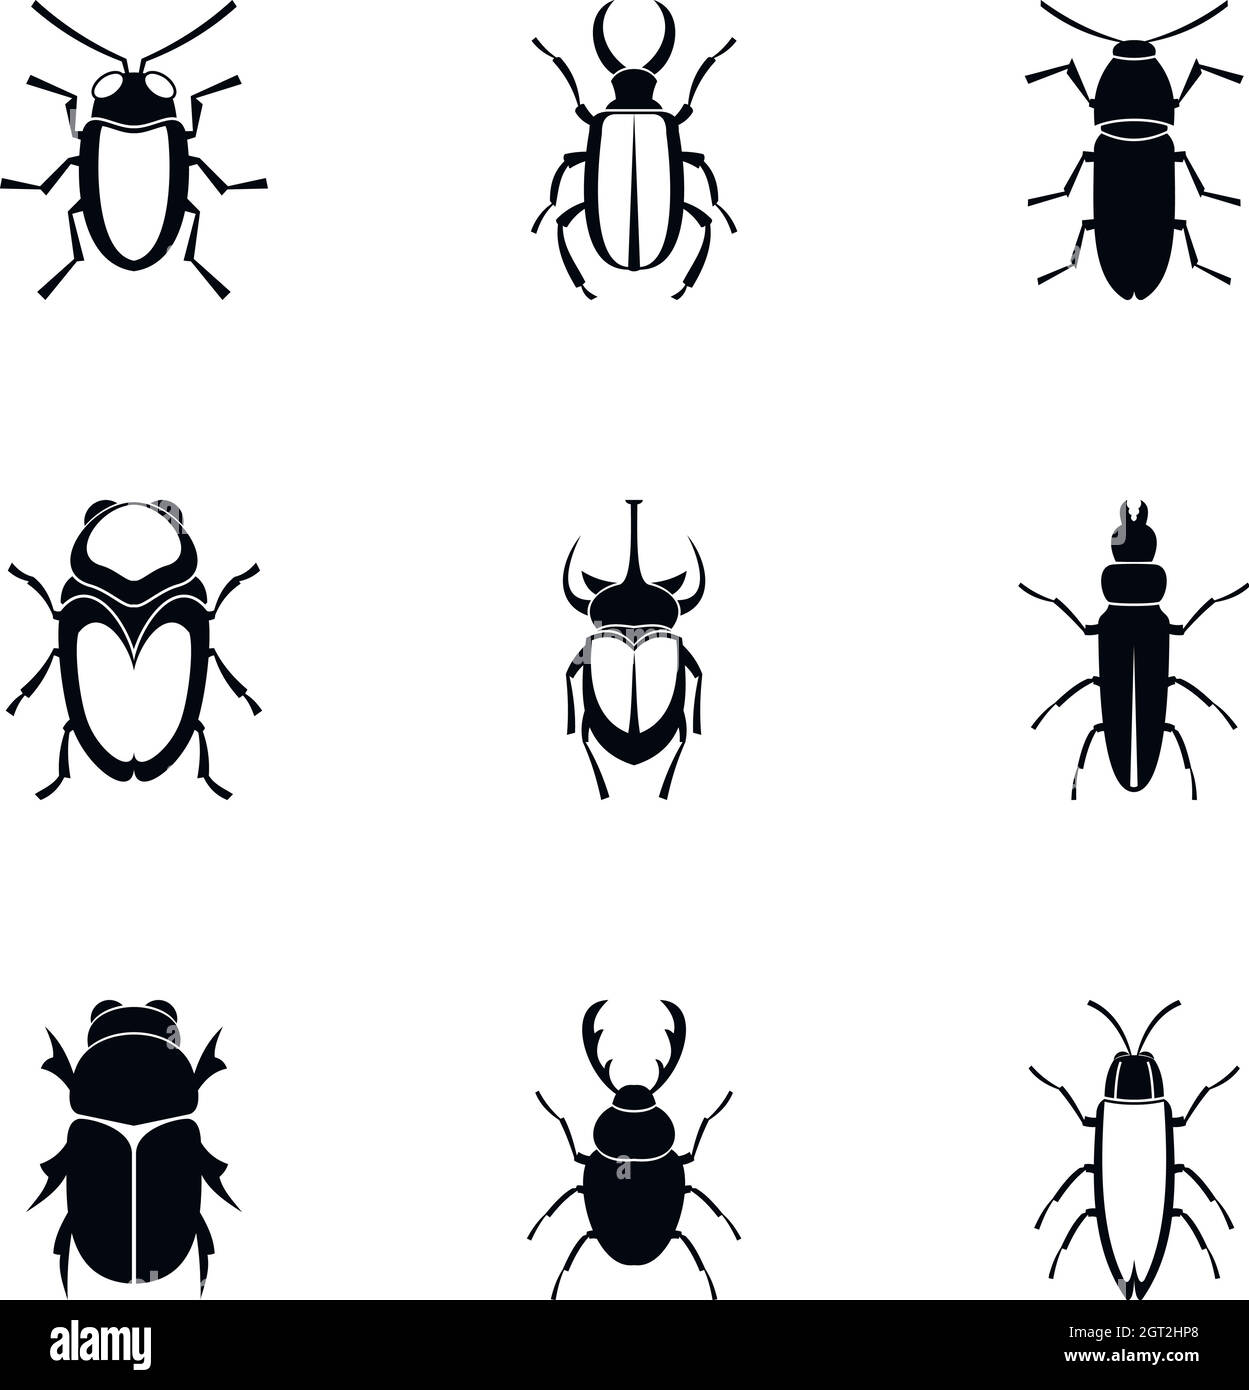 Insects beetles icons set, simple style Stock Vector